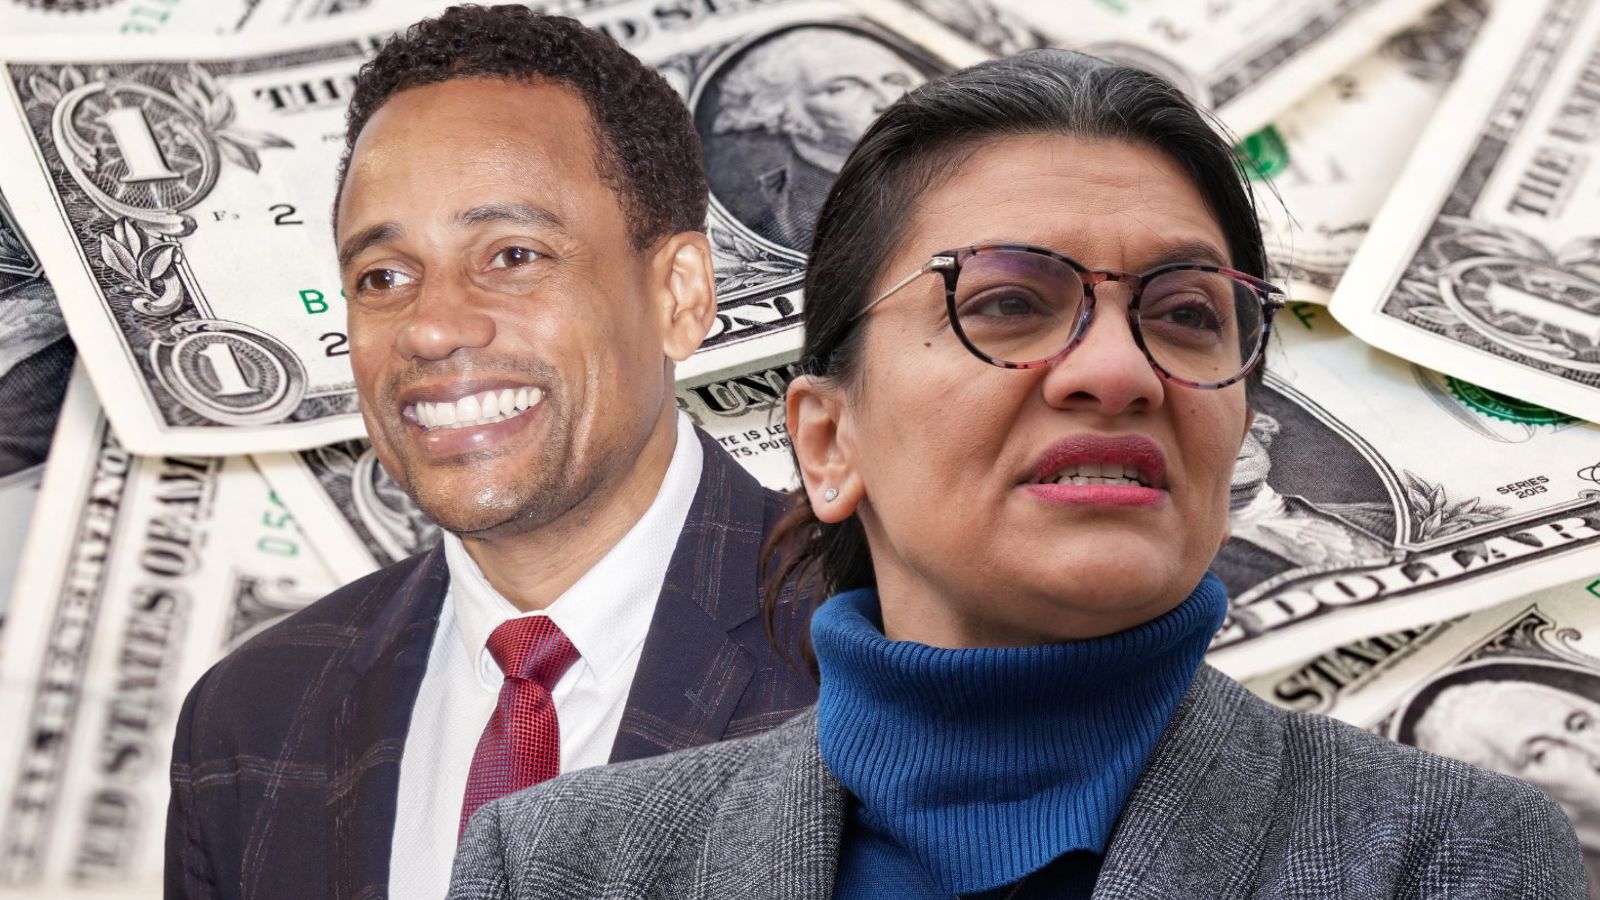 “I Won’t Be Bossed, Bullied, or Bought”: Senate Hopeful Hill Harper Refuses $20 Million Offer To Challenge Pro-Palestinian Rep. Tlaib